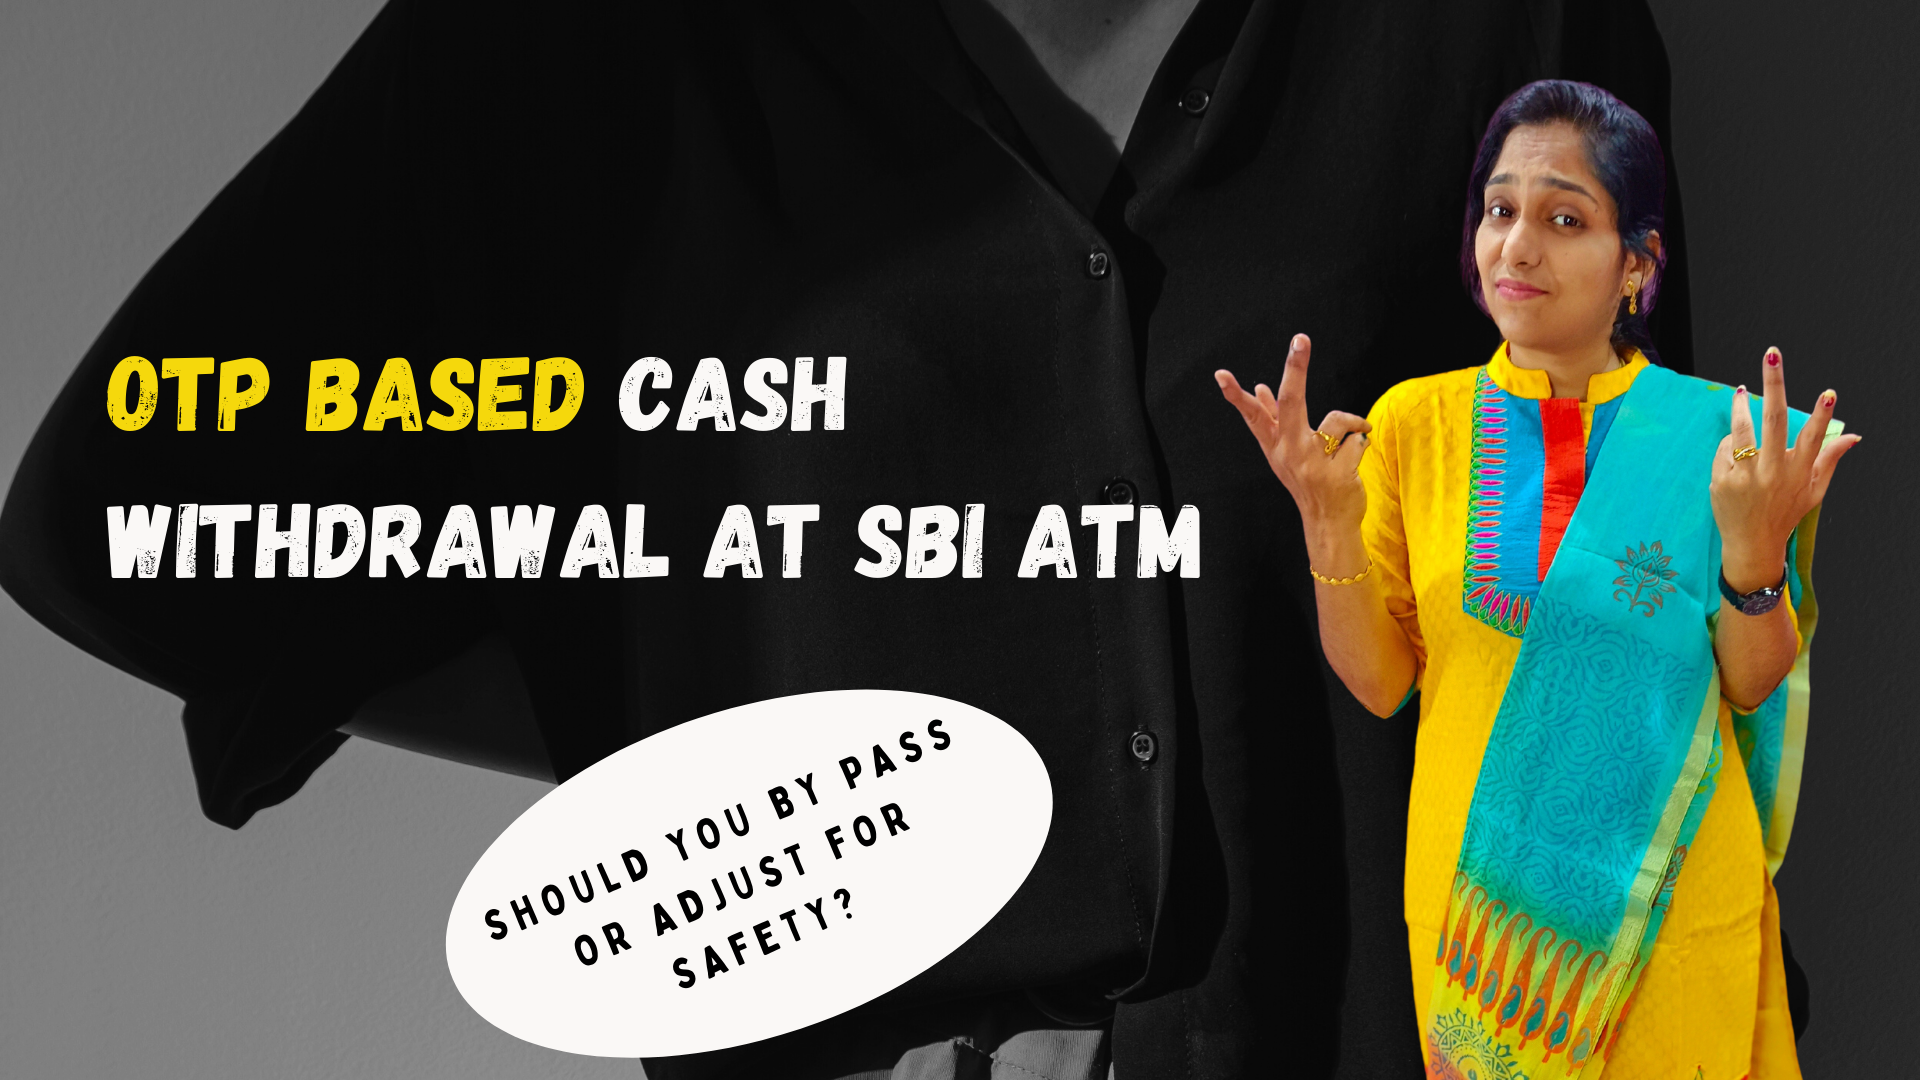 SBI OTP Based Cash Withdrawal At ATM - Should You By Pass Or Adjust For Safety?